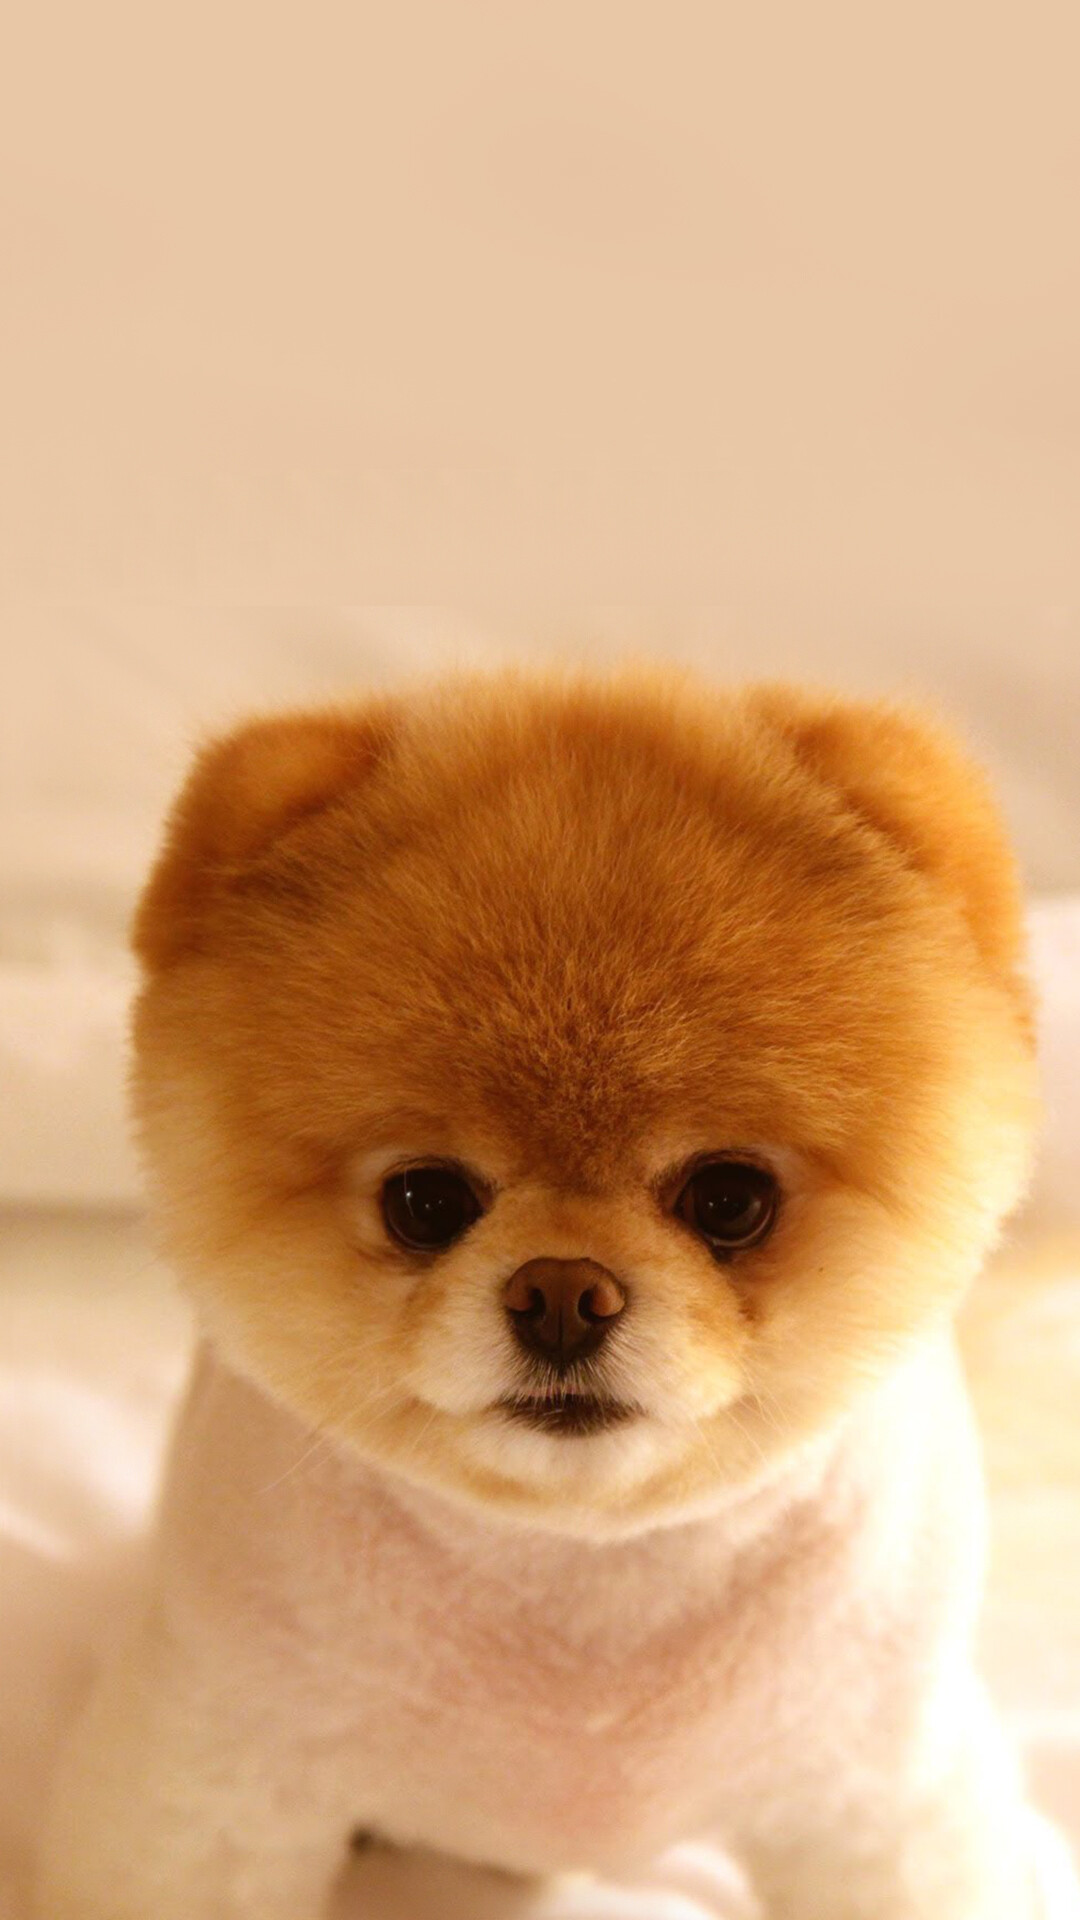 Puppy: Pomeranian, A breed of dog of the Spitz type, Canis familiaris. 1080x1920 Full HD Wallpaper.